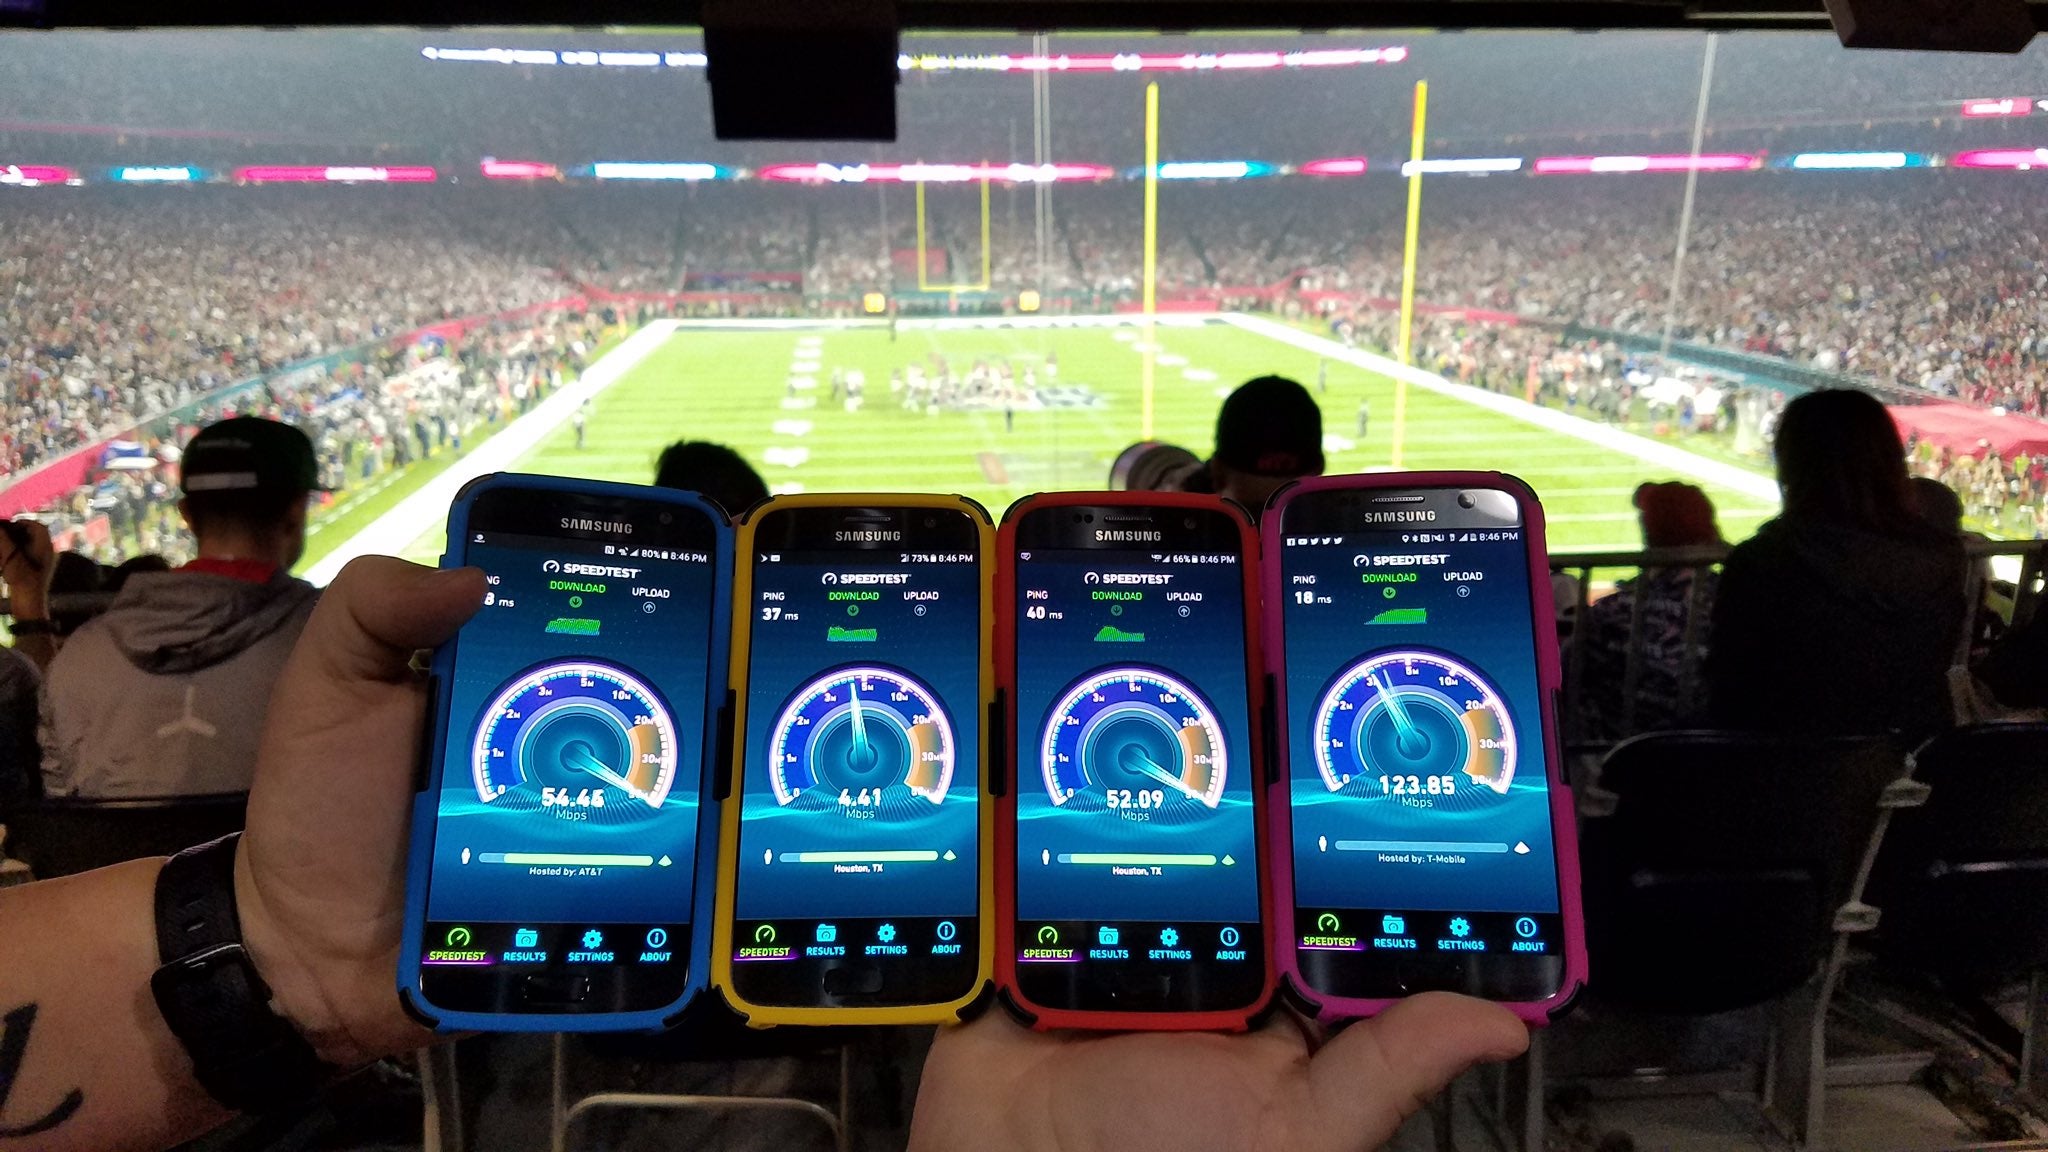 T-Mobile's CTO poses with AT&amp;T, Sprint, Verizon and T-Mobile momentous Speedtest results at the Super Bowl - T-Mobile trolls Verizon, AT&T and Sprint again, hits highest LTE speeds at the Super Bowl LI